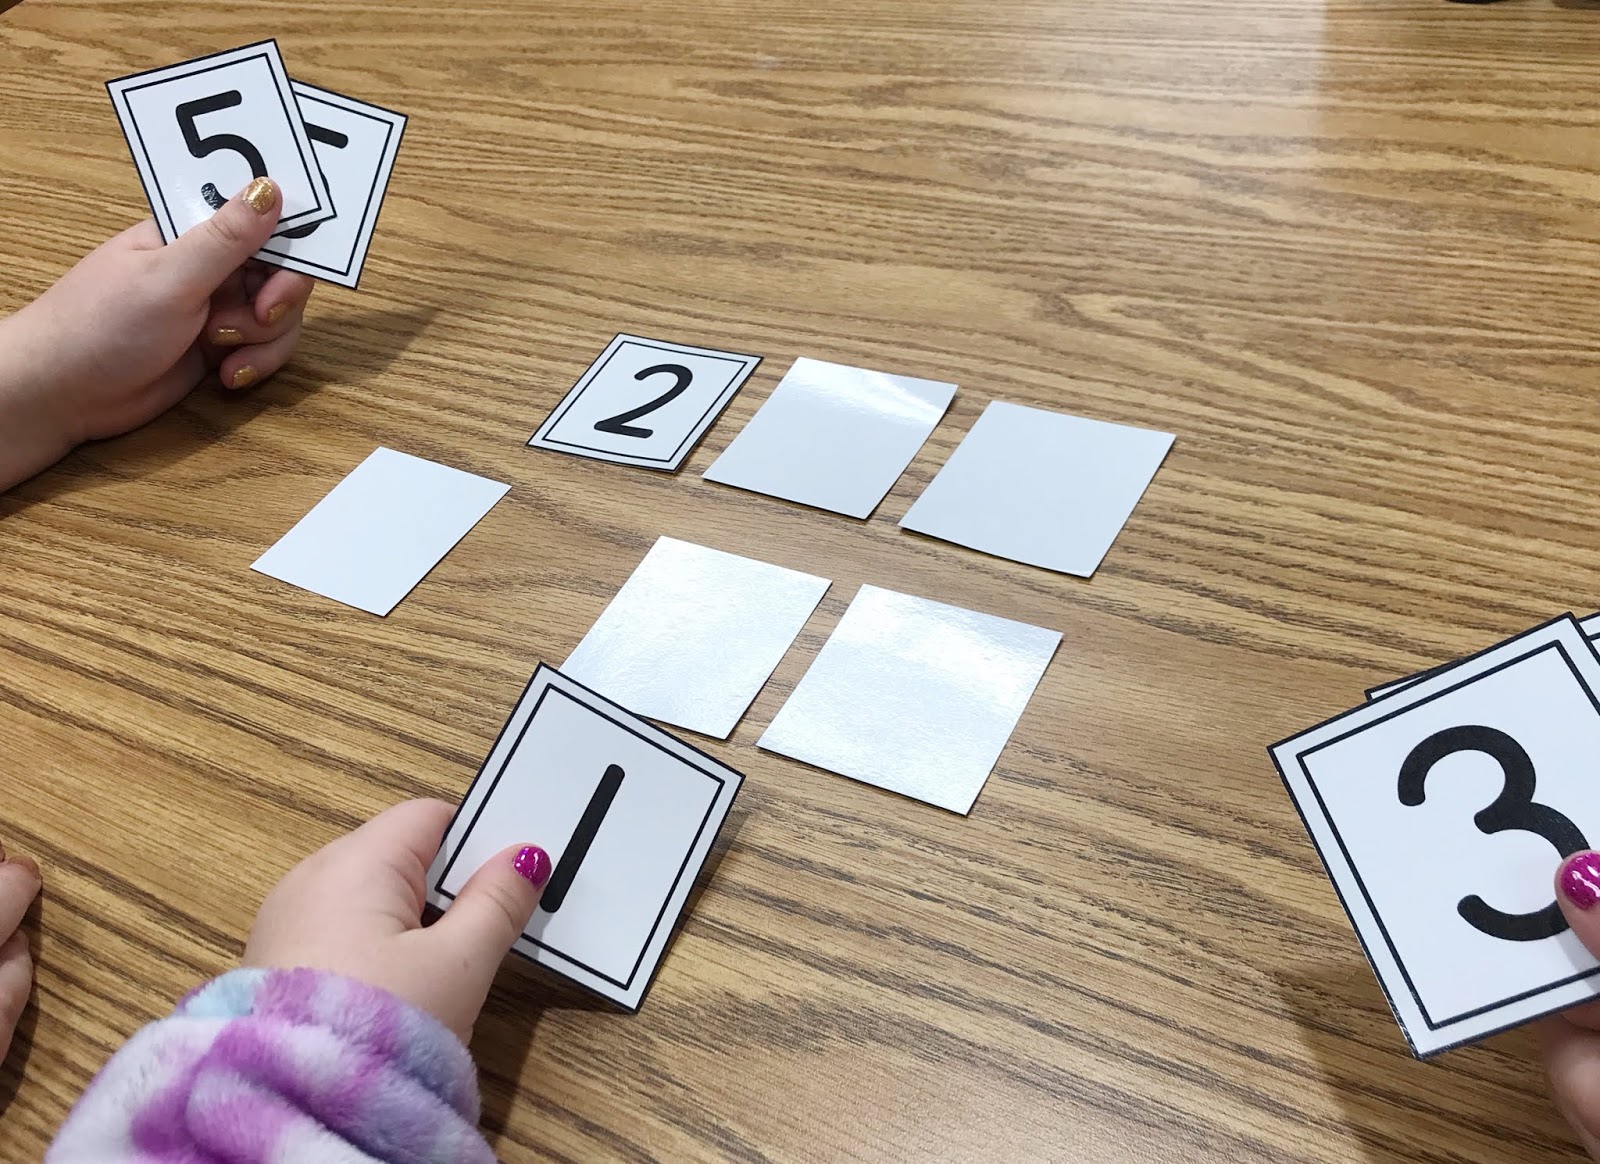 Need some fun ideas to help with number recognition and counting for your elementary students? Be sure to check out this blog post and print the freebie! Practicing numbers and counting is made simple, with these games. They are perfect for small groups, centers, or fast finishers. One game allows for instant differentiation for students who need extra attention. Students will enjoy a change of pace to play a "game", while utilizing their number recognition skills {elementary, counting, freebie}